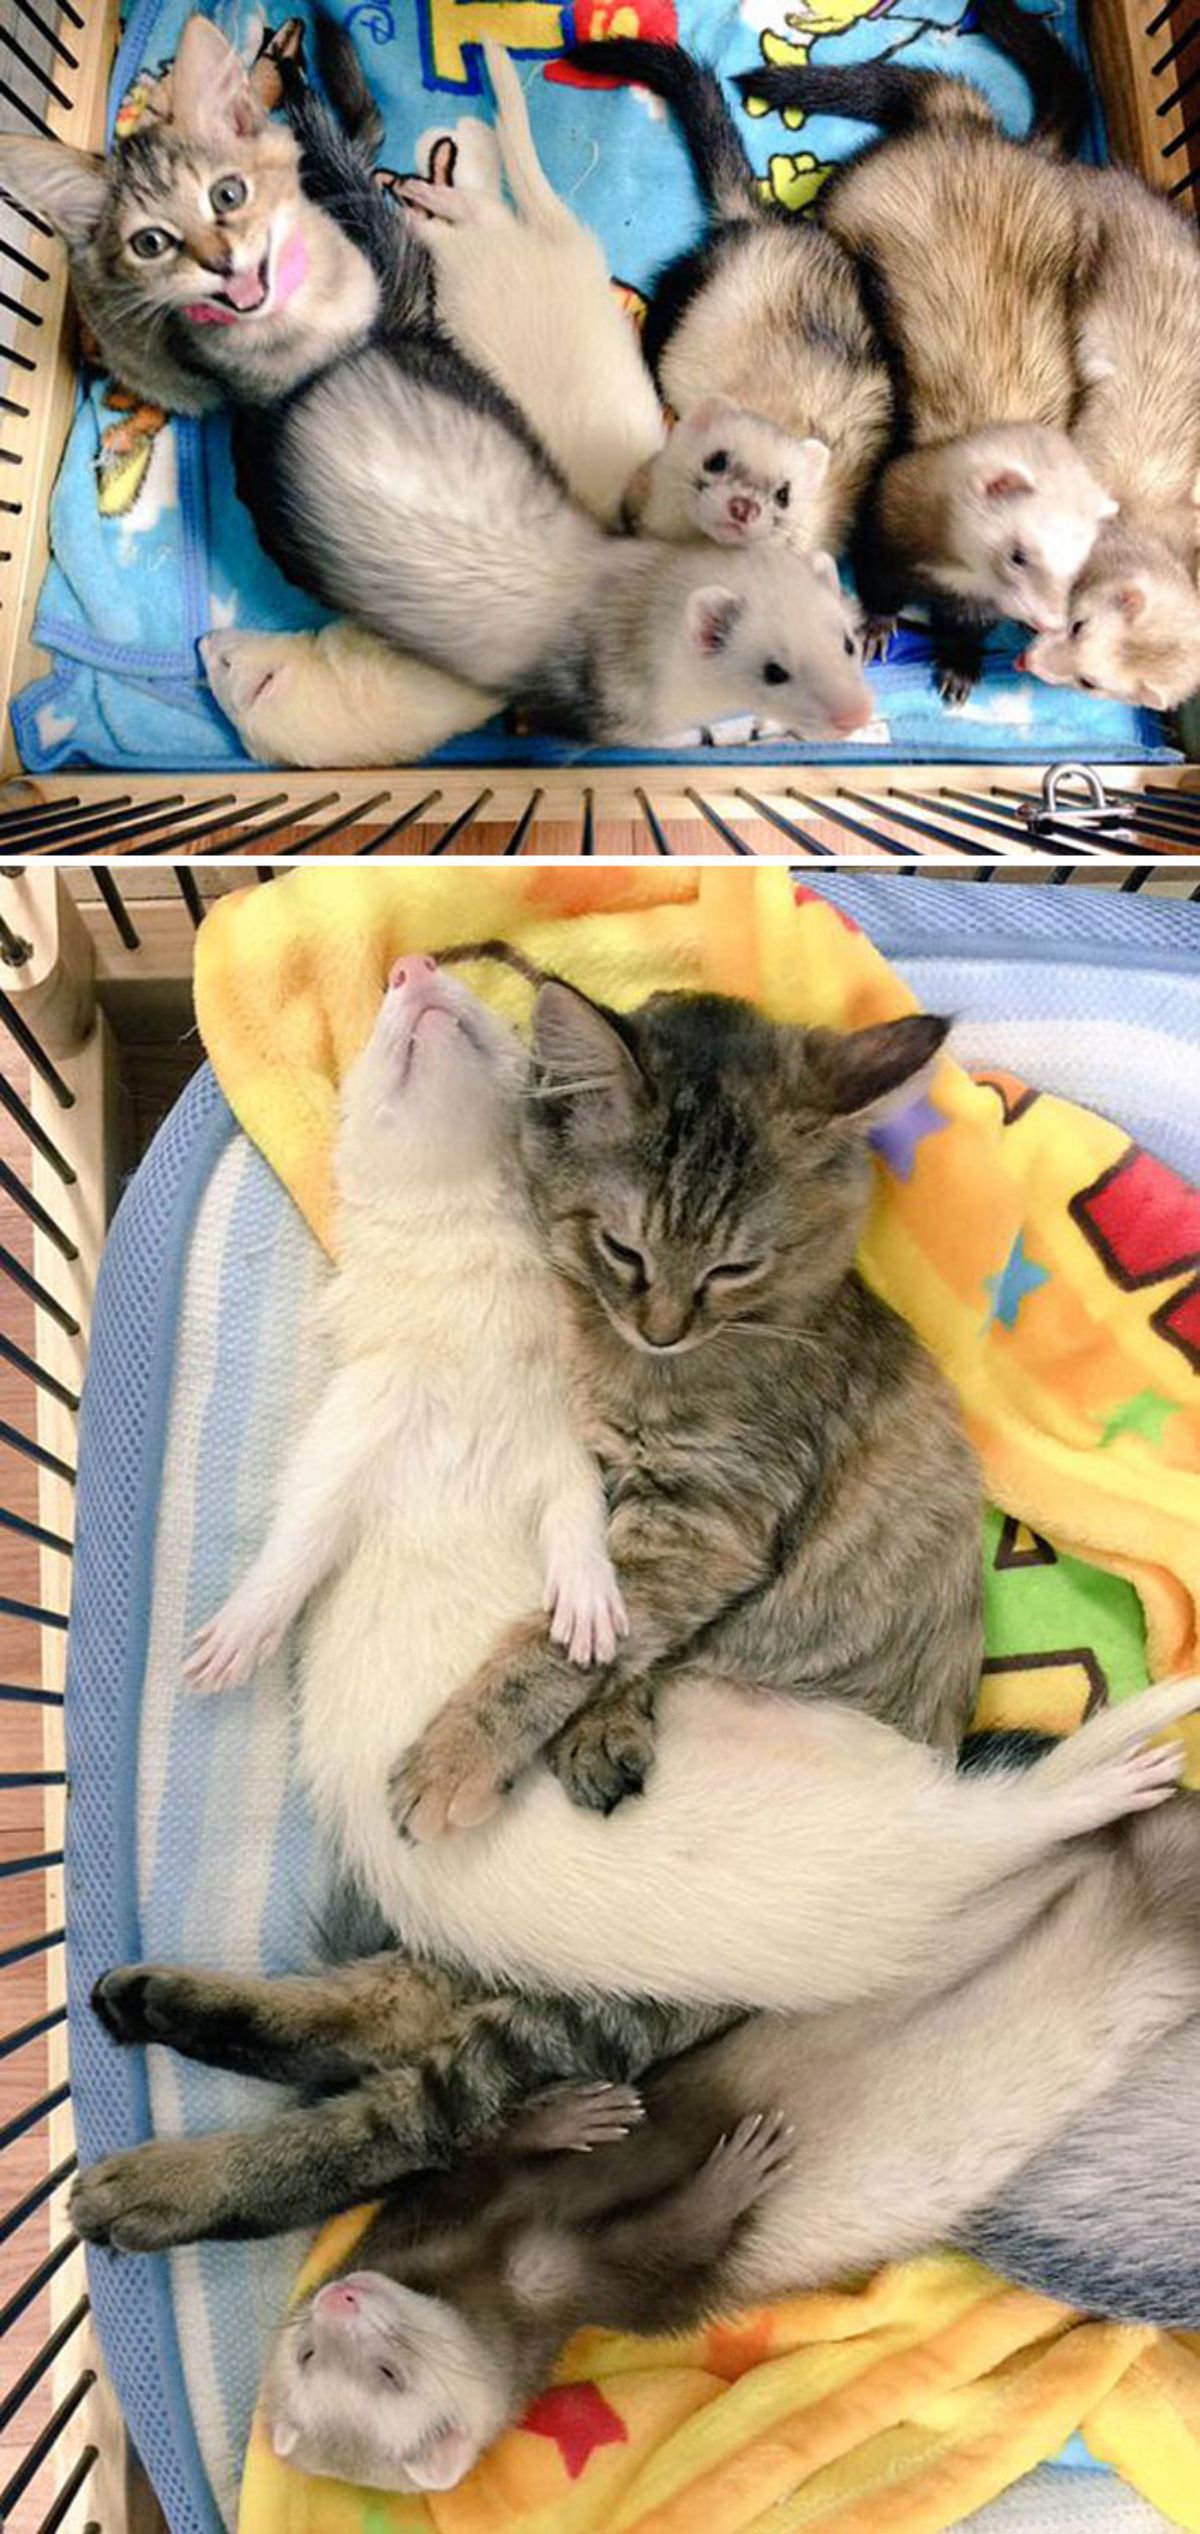 1 photo of 4 black and white ferrets and 1 white ferret with a grey tabby kitten in a cage and 1 photo of white ferret and black and brown ferret cuddling with the kitten